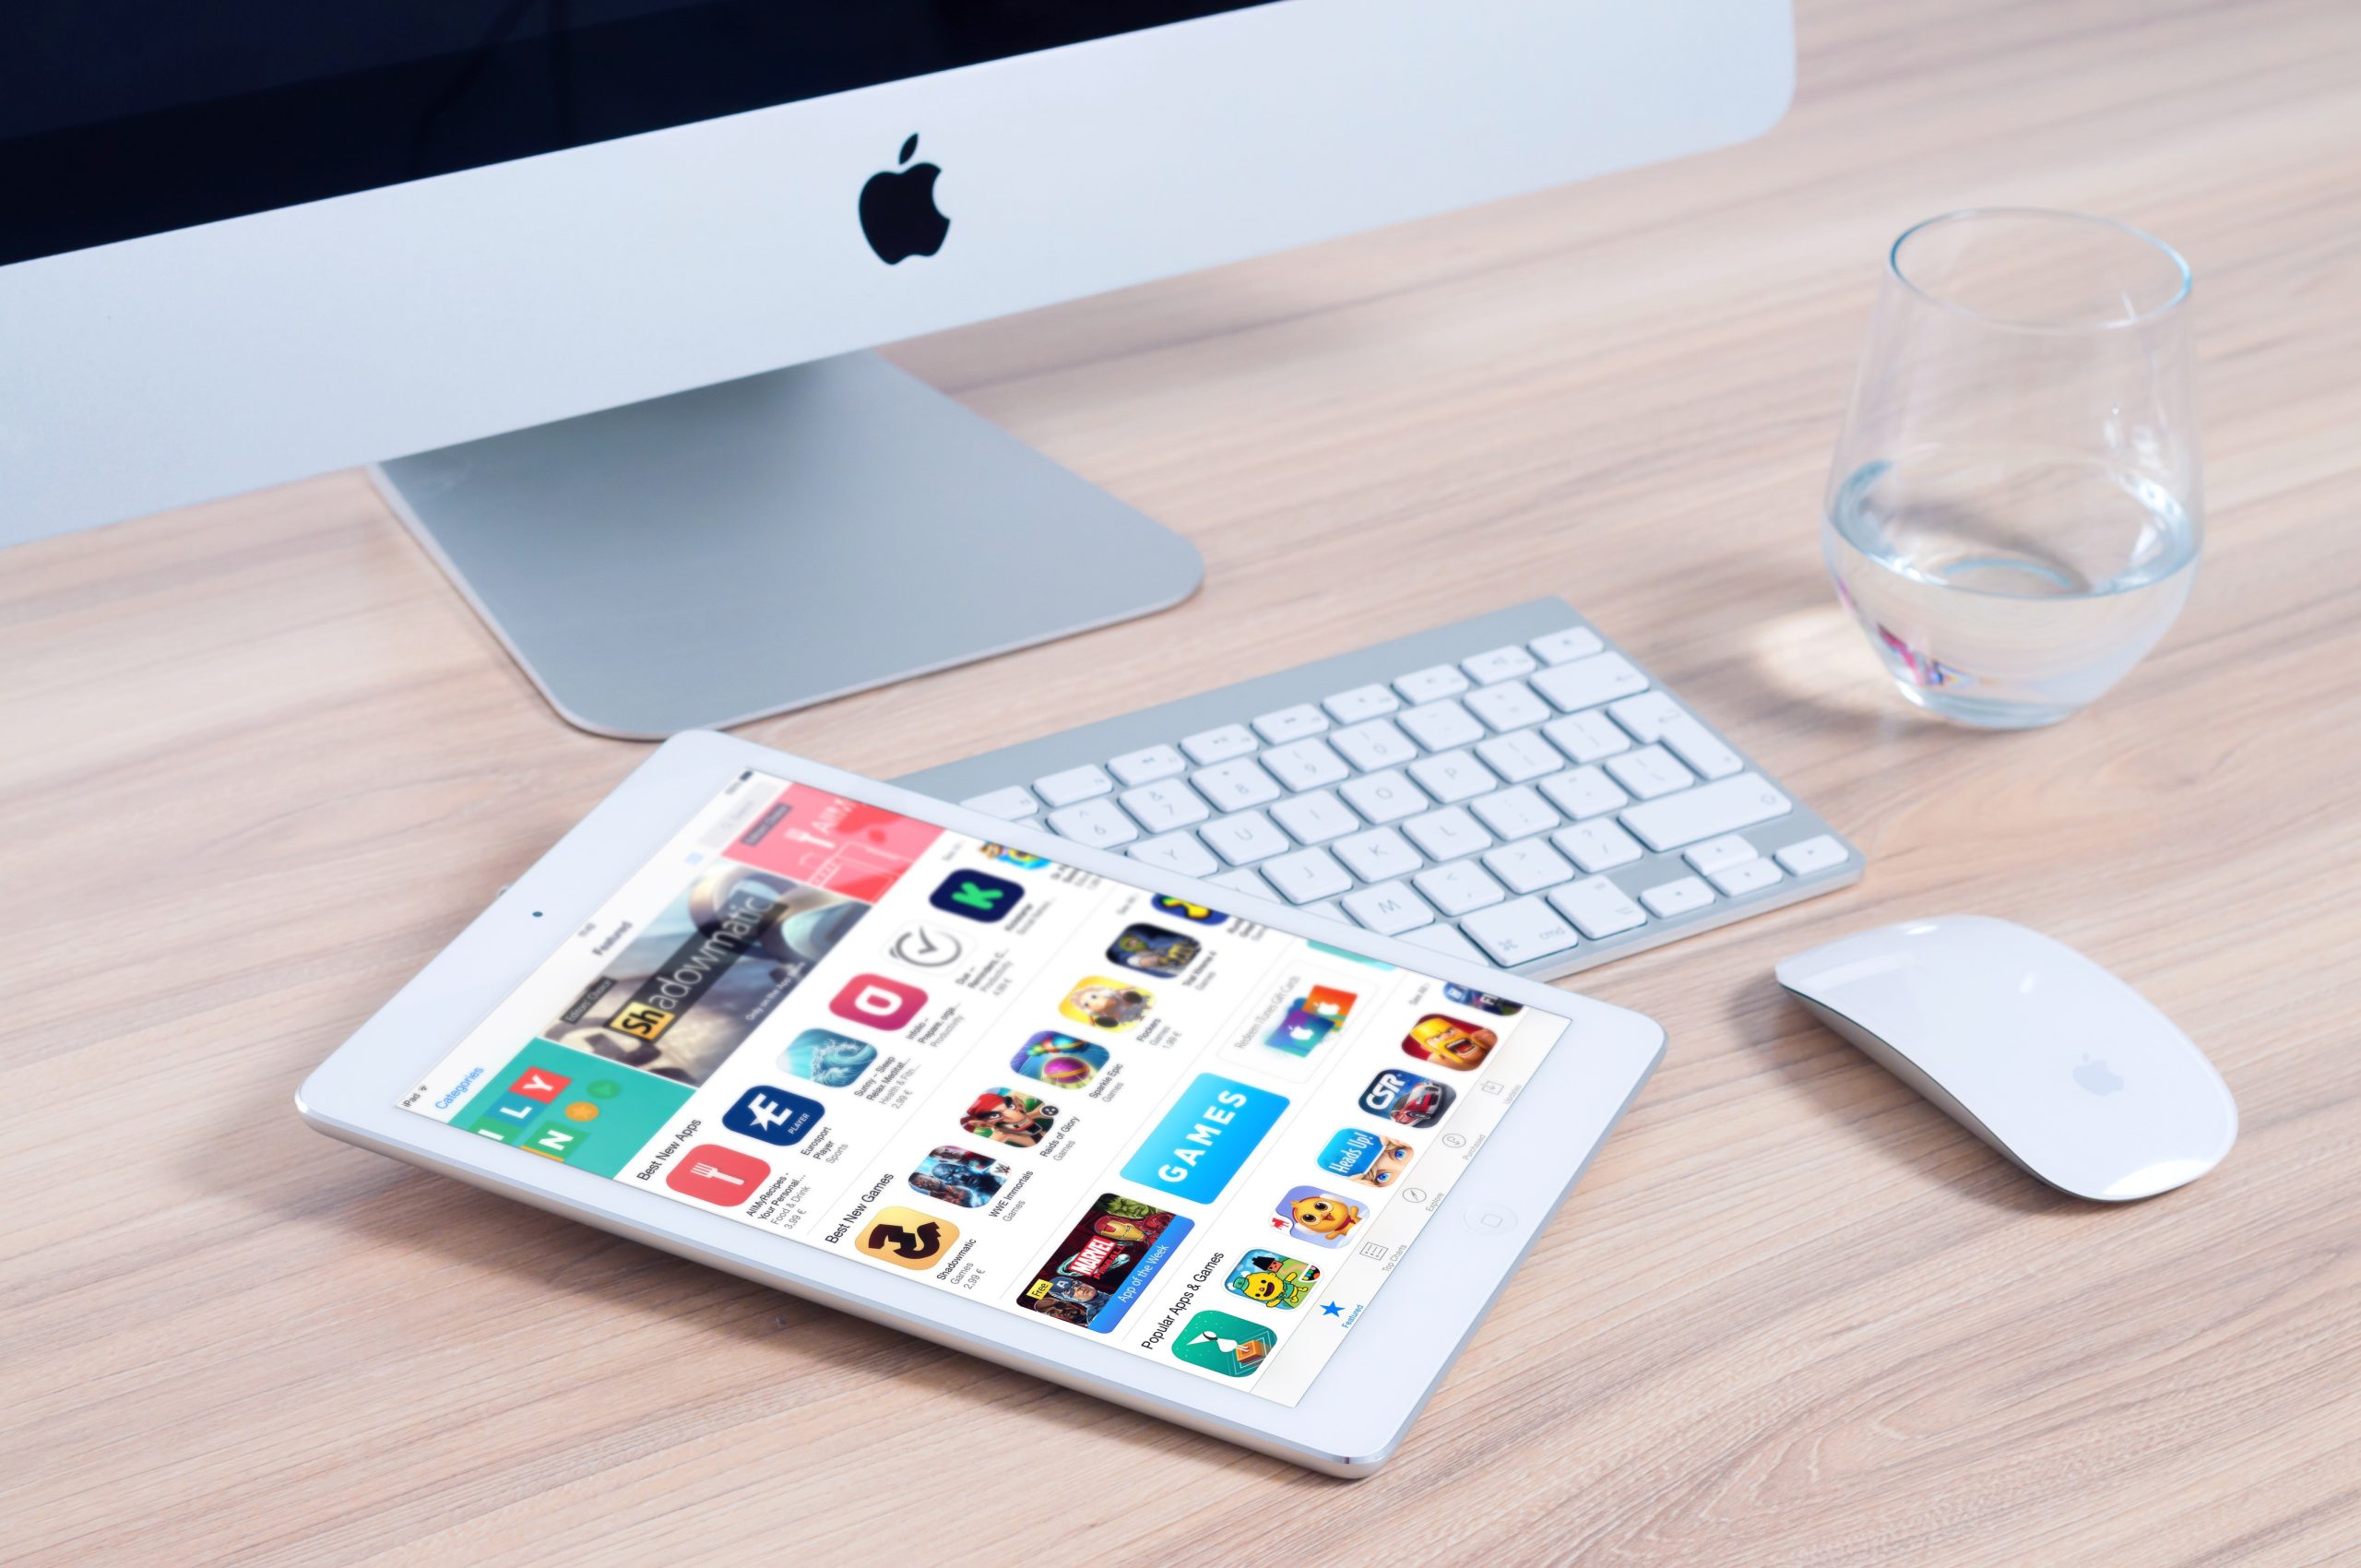 Should your business consider creating a mobile application